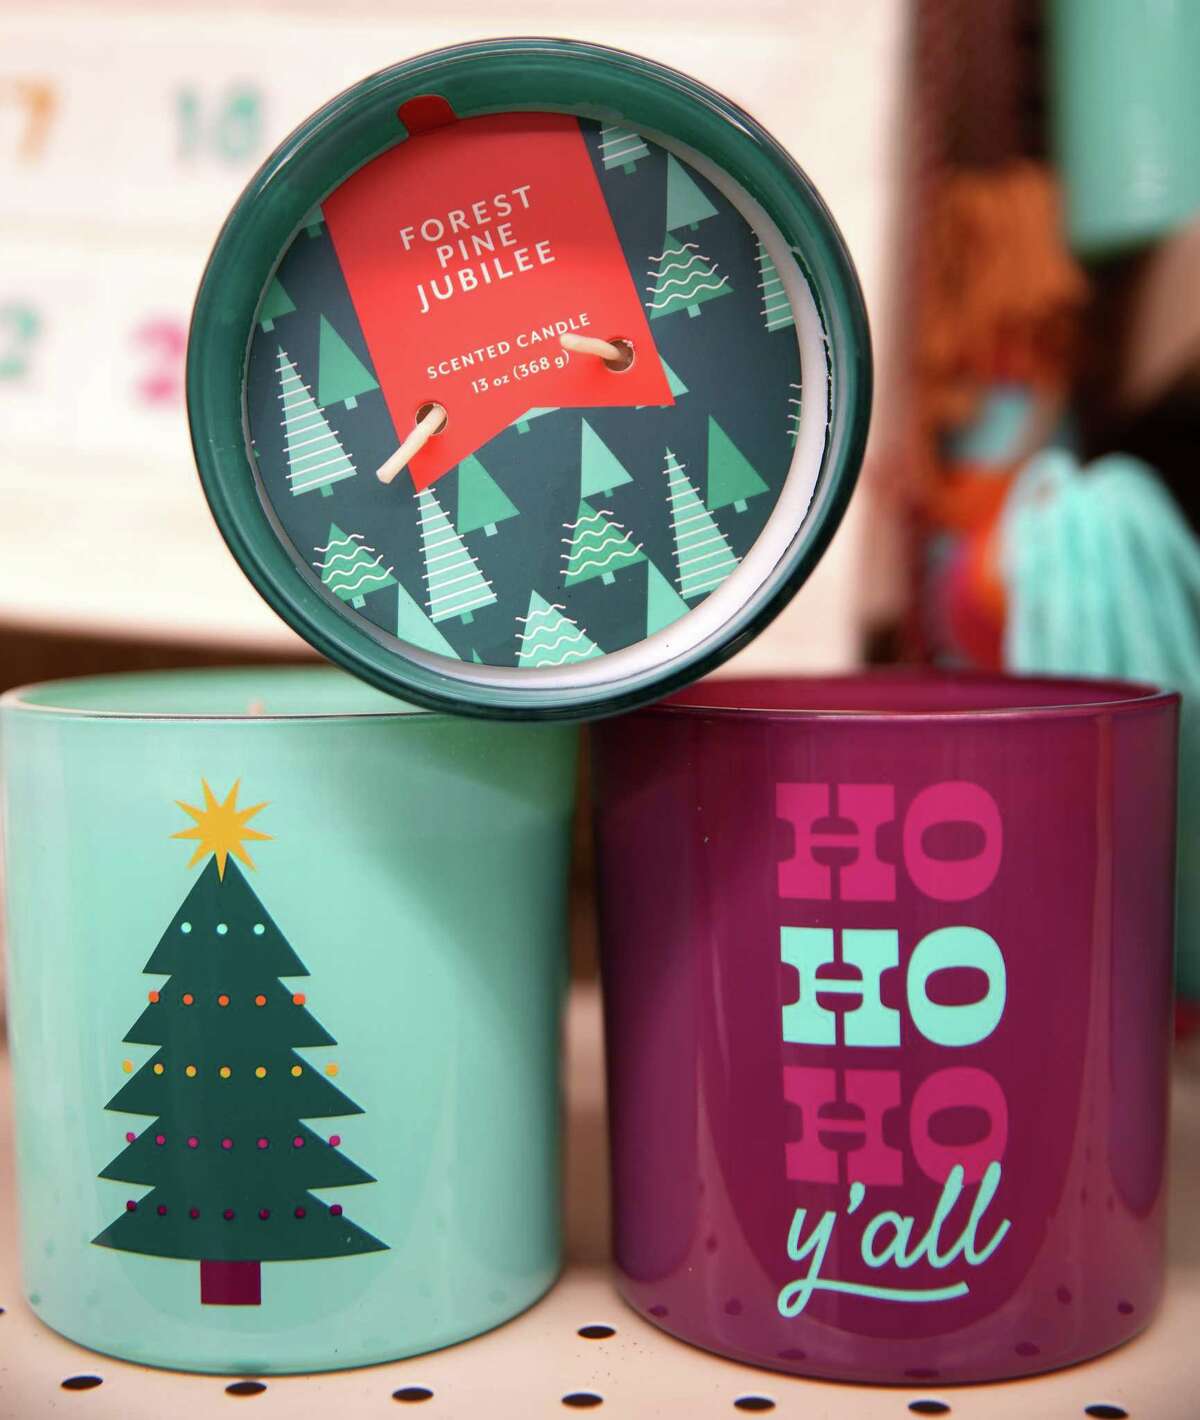 Scented candles with seasonal greetings available at HEB.